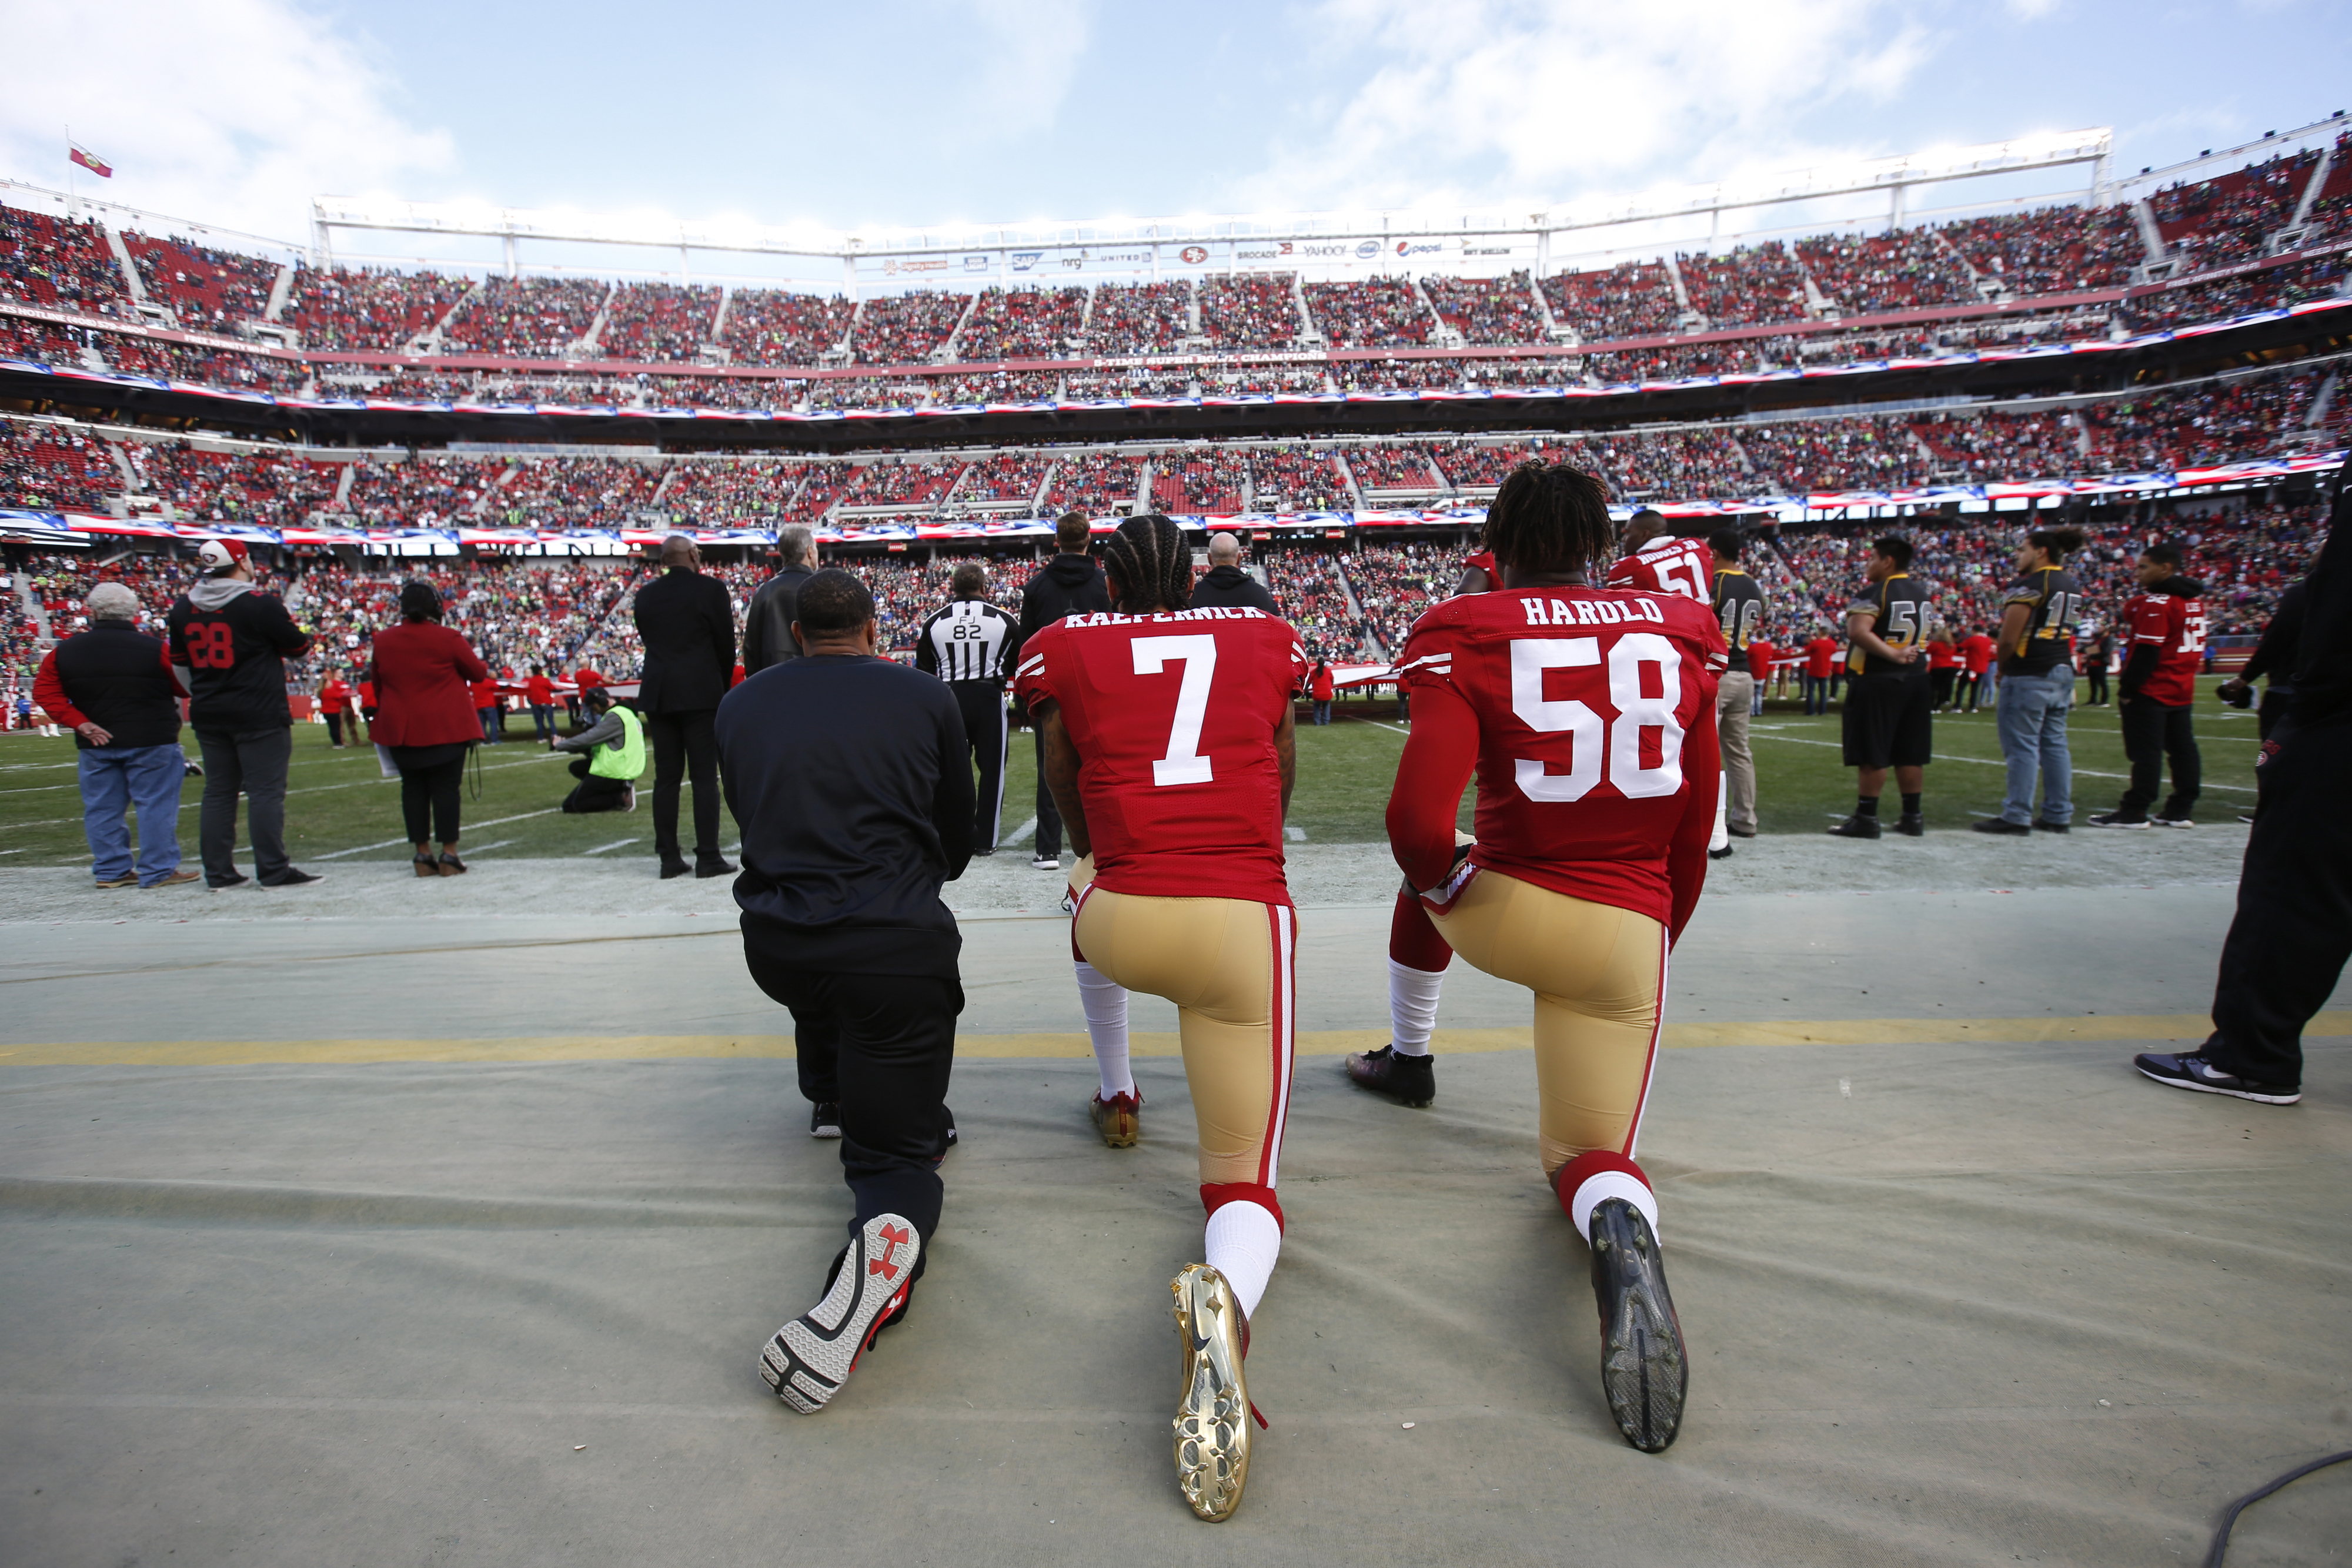 Colin Kaepernick #7 and Eli Harold #58 of the San Francisco 49ers kneel on the sideline, during the anthem